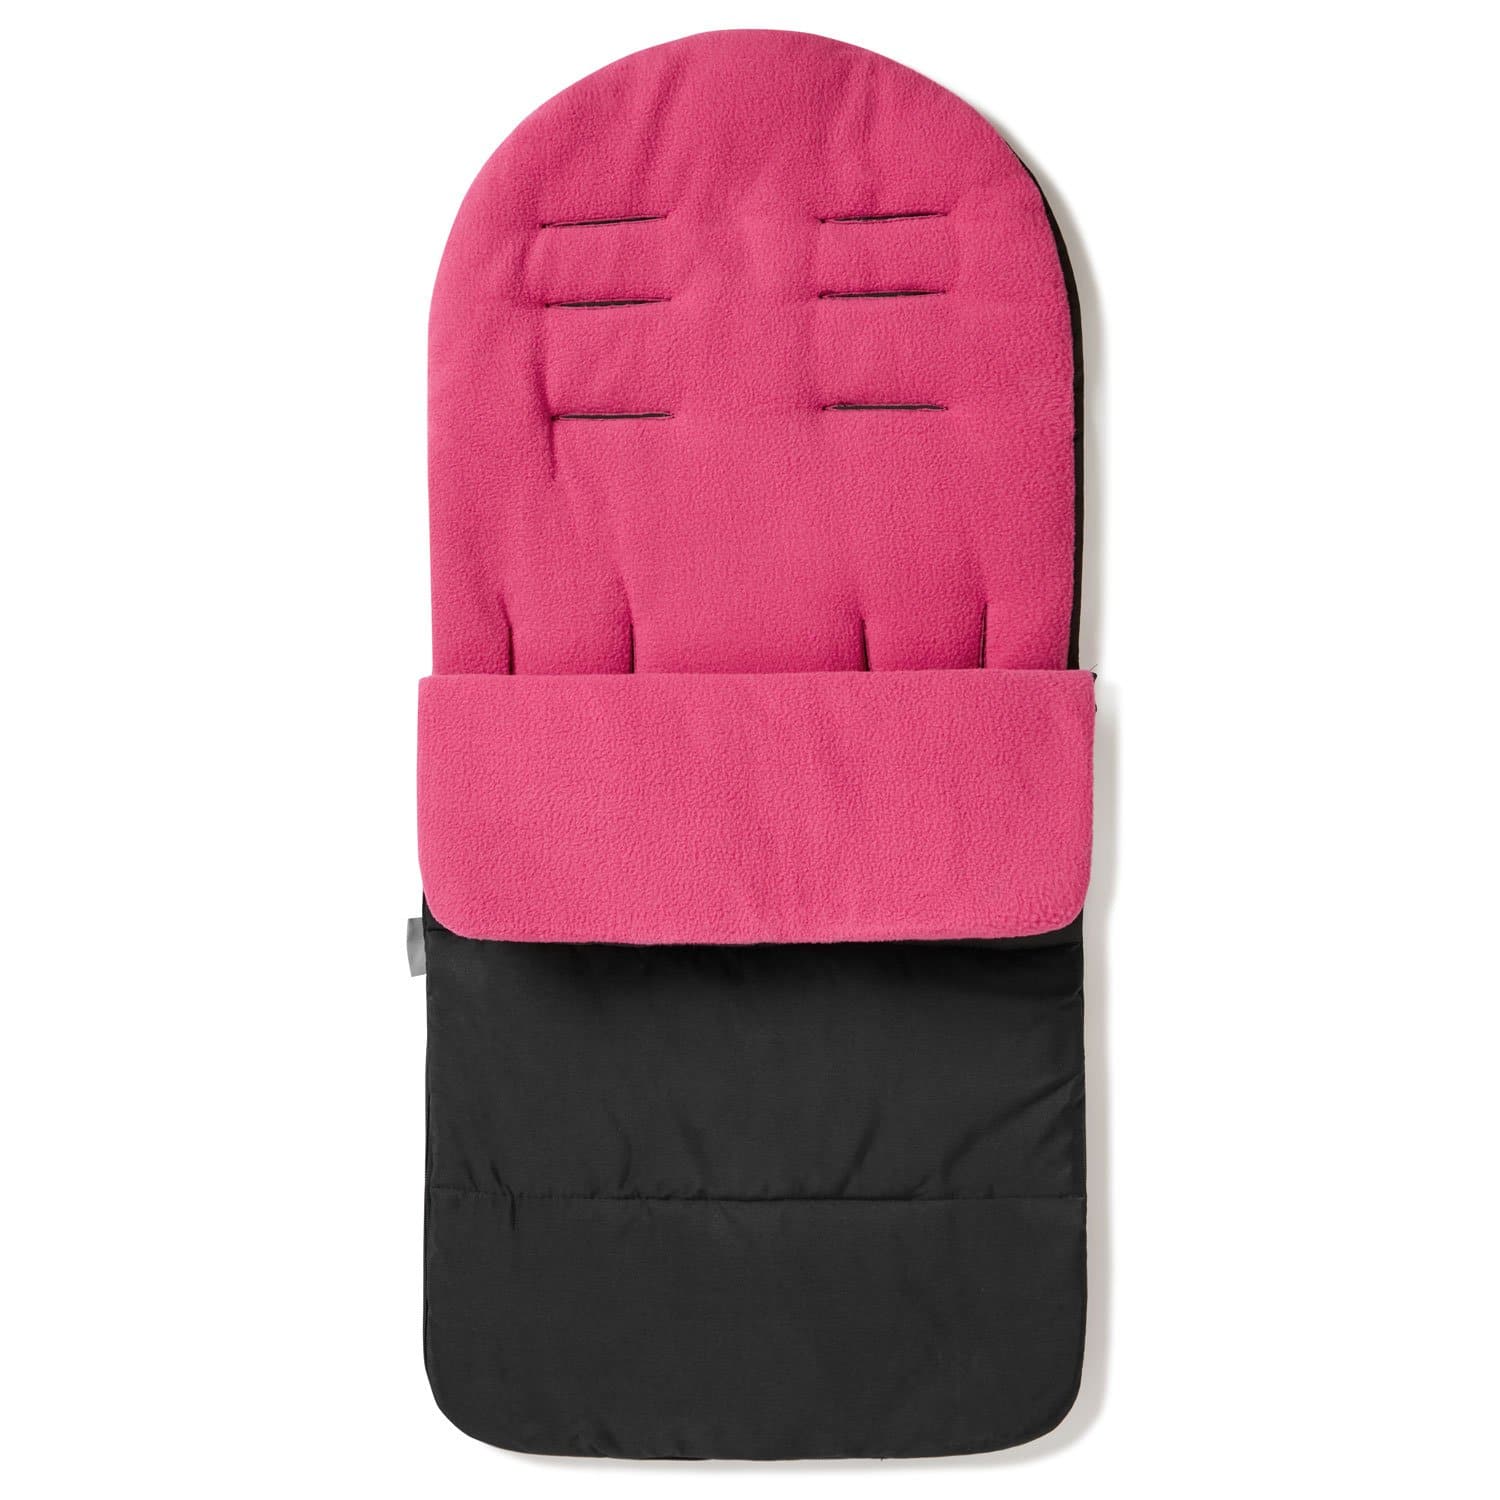 Premium Footmuff / Cosy Toes Compatible with Concord - Pink Rose / Fits All Models | For Your Little One